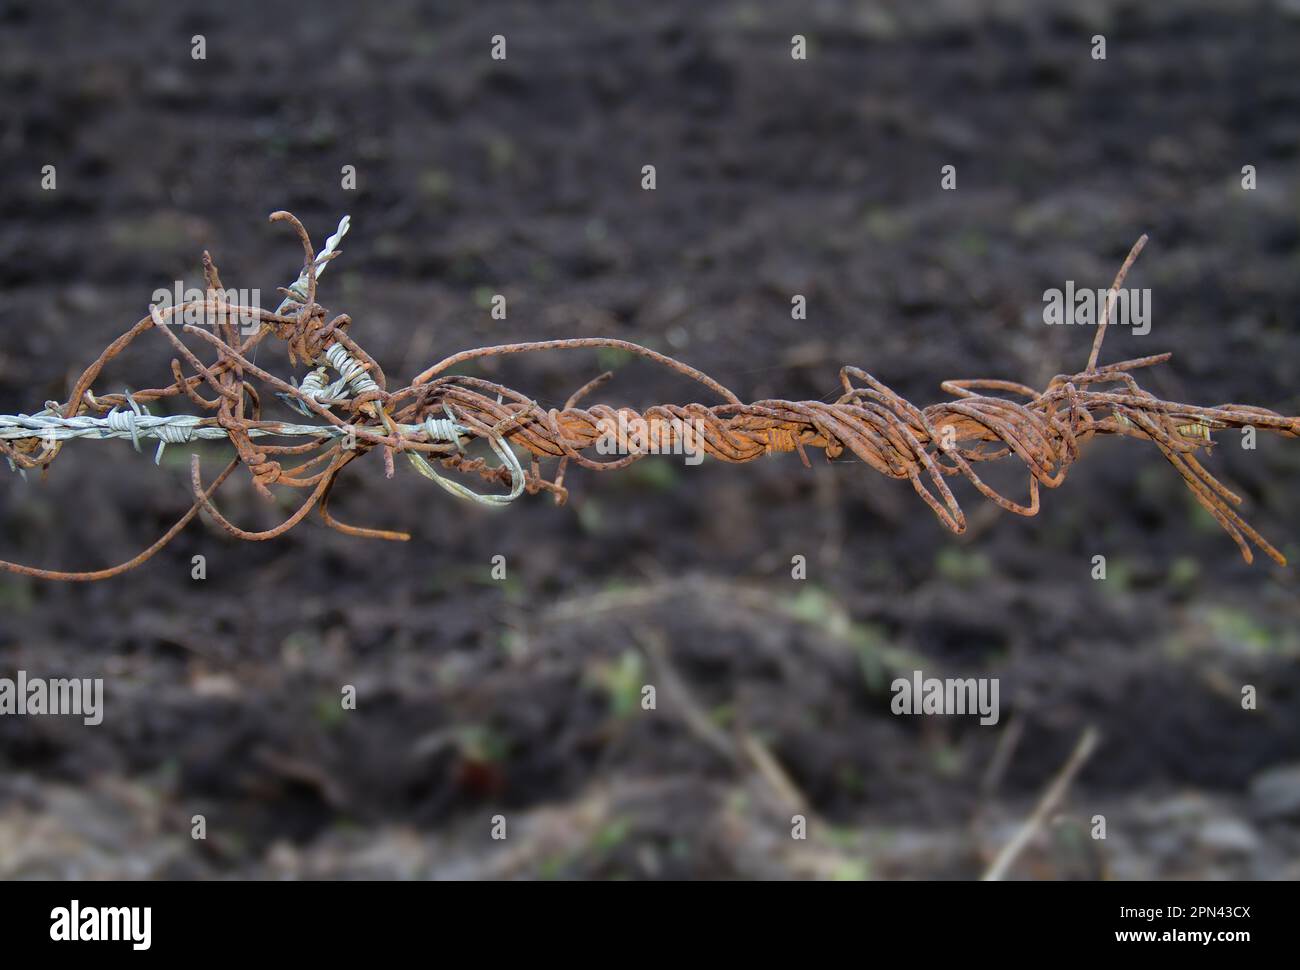 Old and new: entangled rusty barbed wire and stainless steel wire Stock Photo